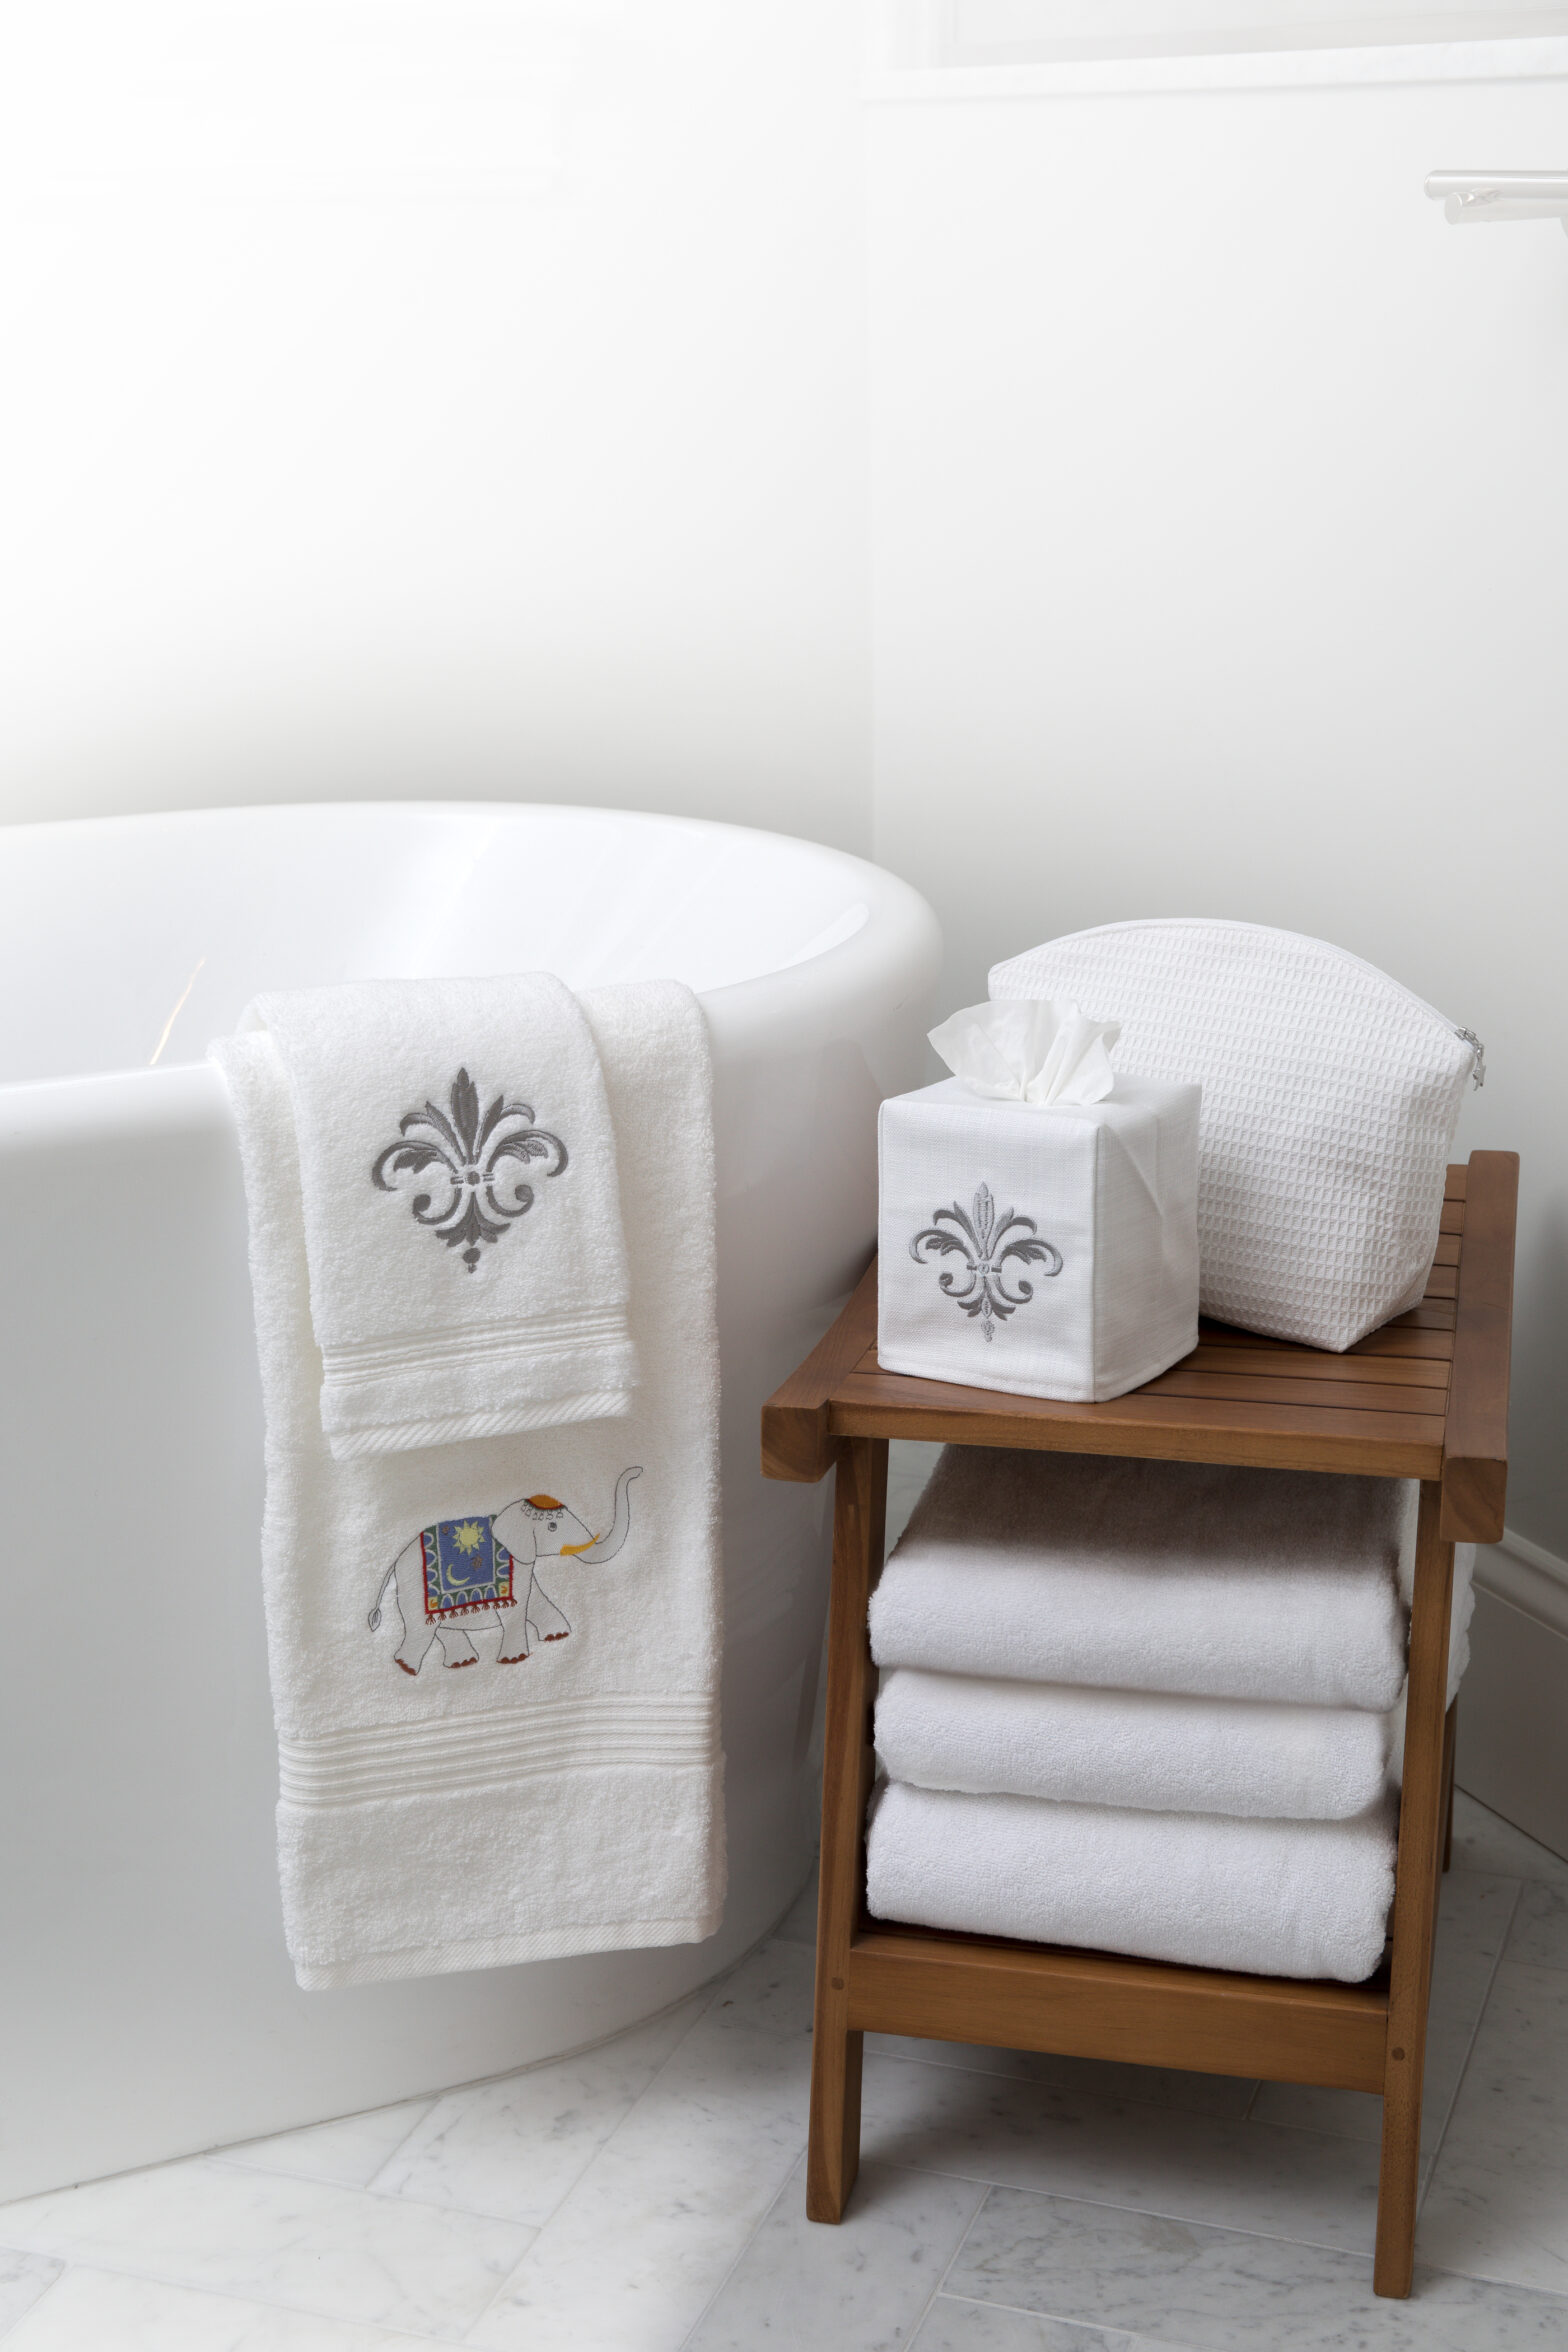 Embroidered bathroom accessories